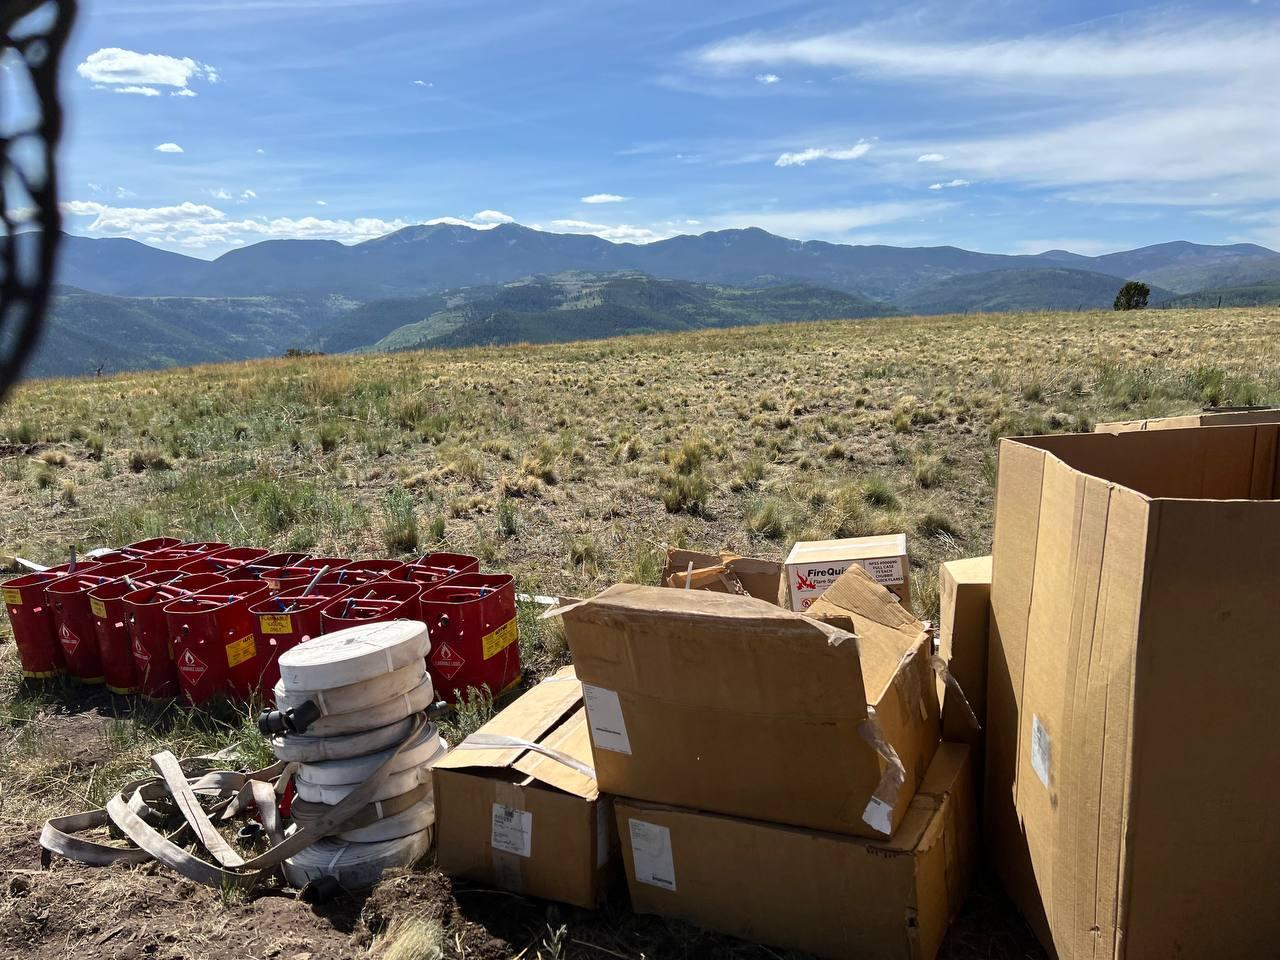 Multiple red gas cans, rolls of white hose, and cardboard boxes of equipment sit in an open meadow